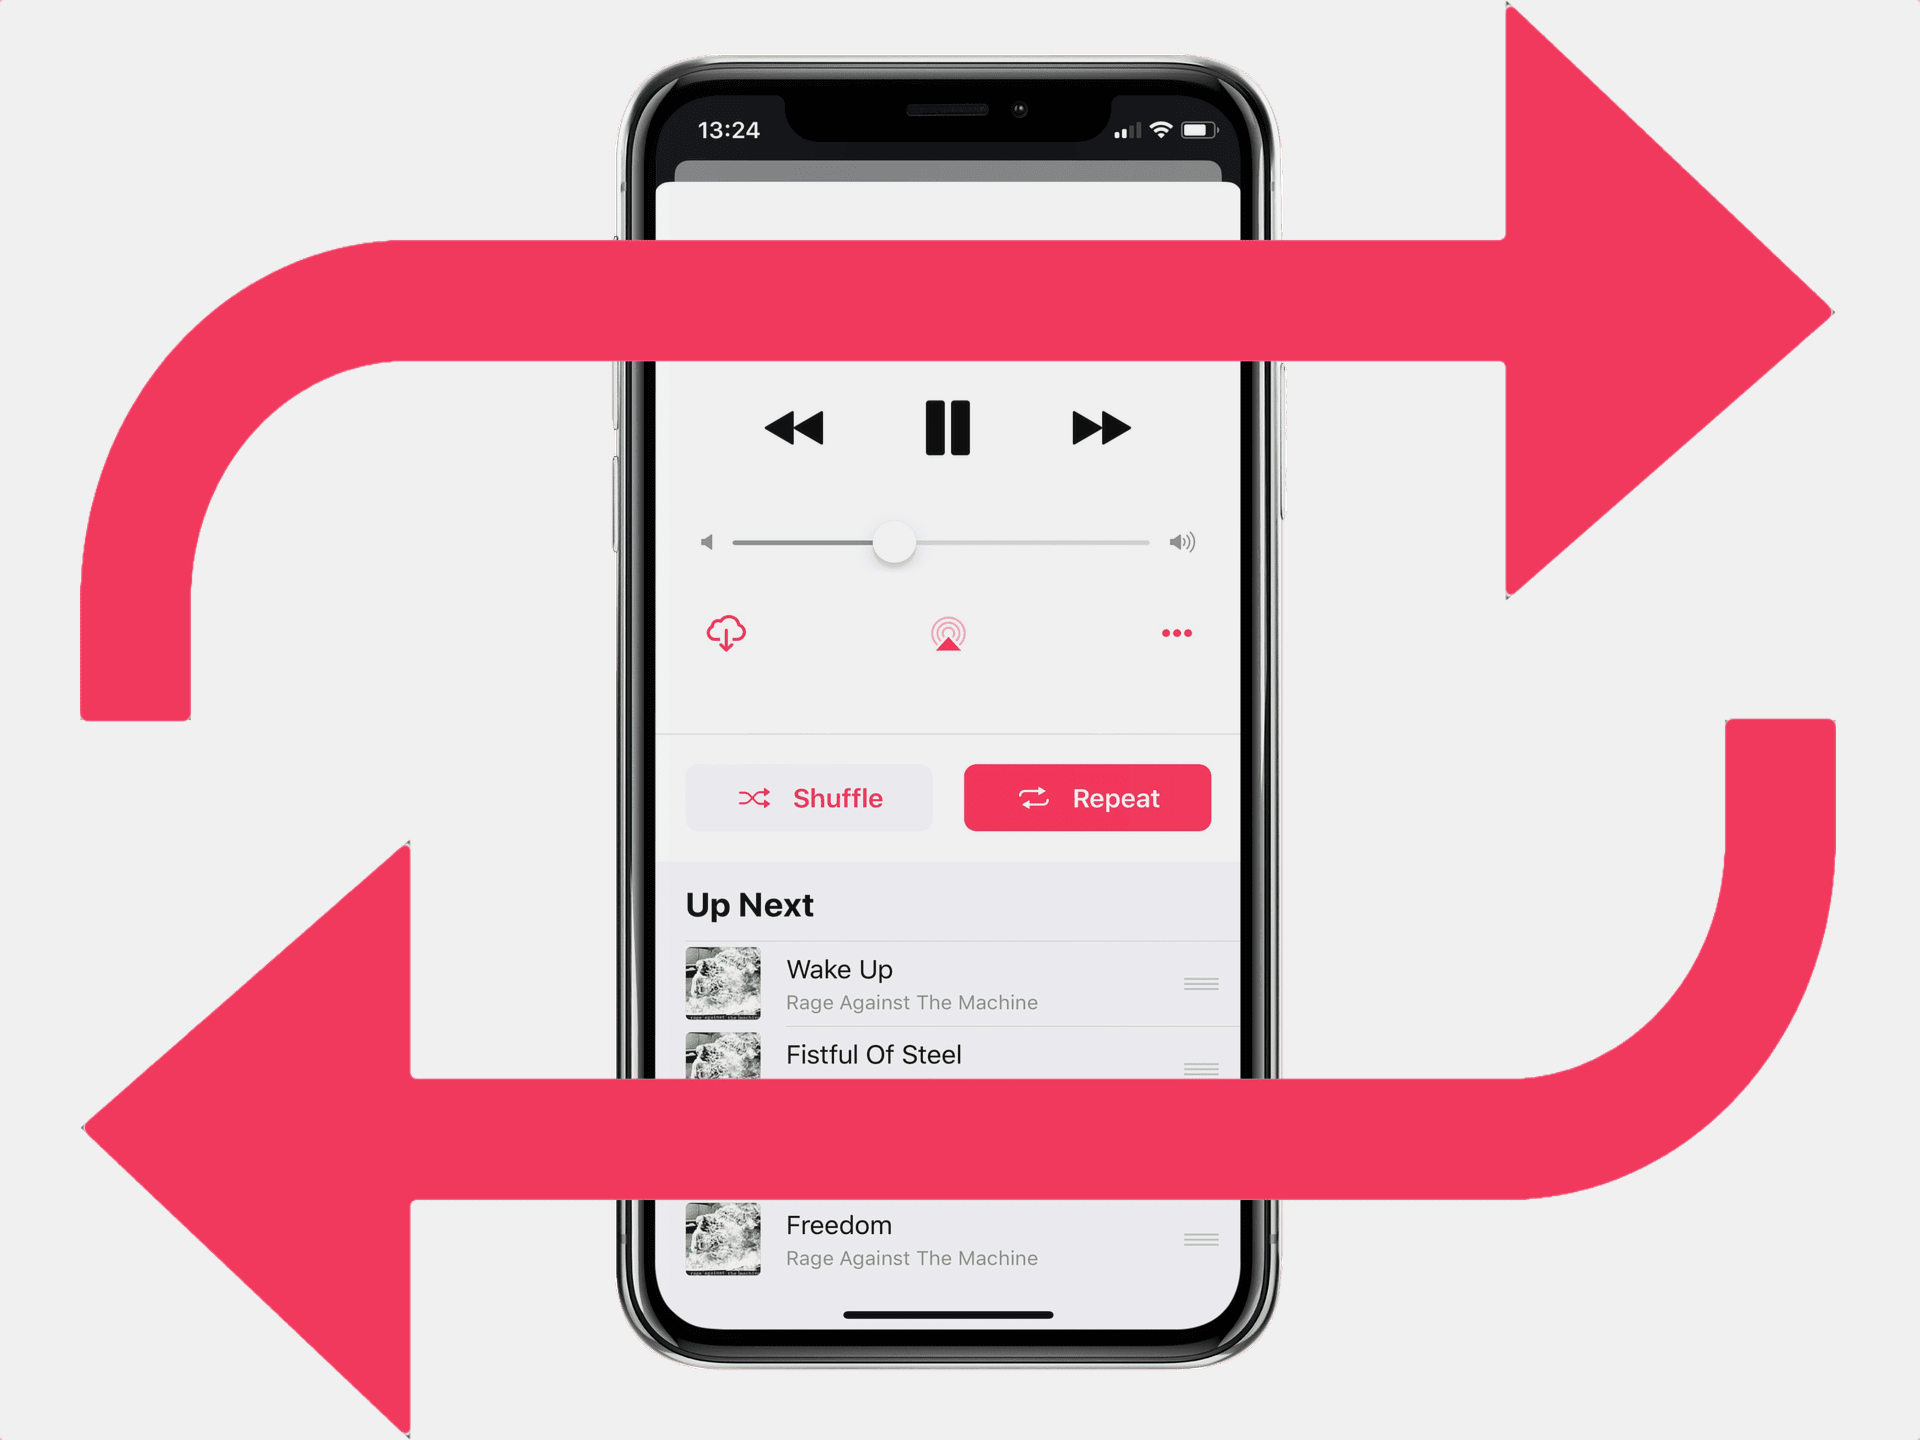 How to repeat songs, albums, and playlists in Apple Music app